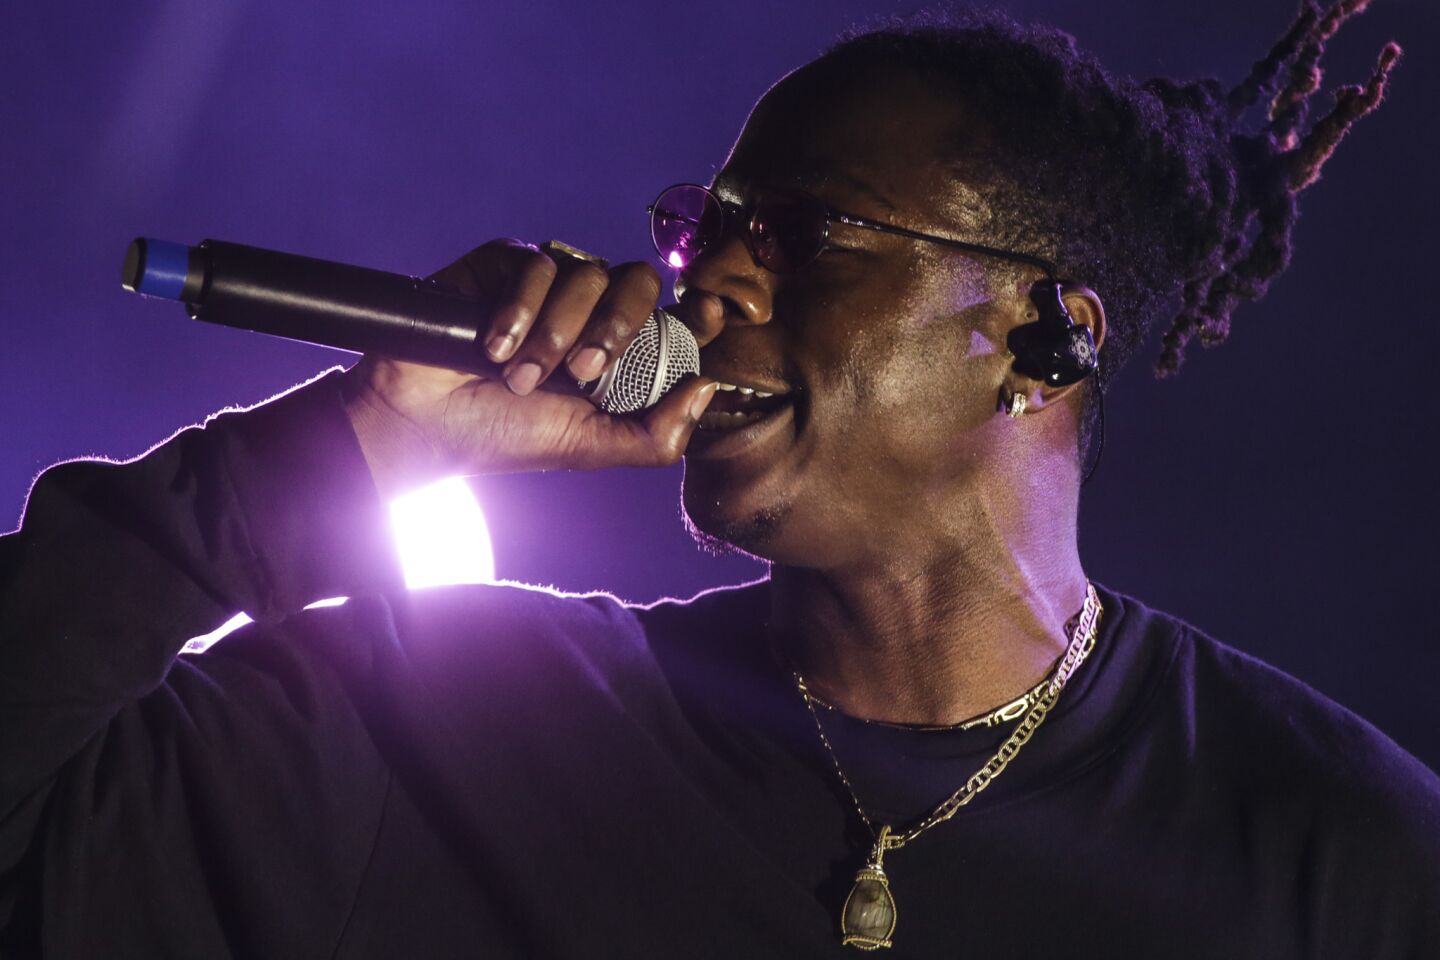 Joey Bada$$ performs on the Gold stage.